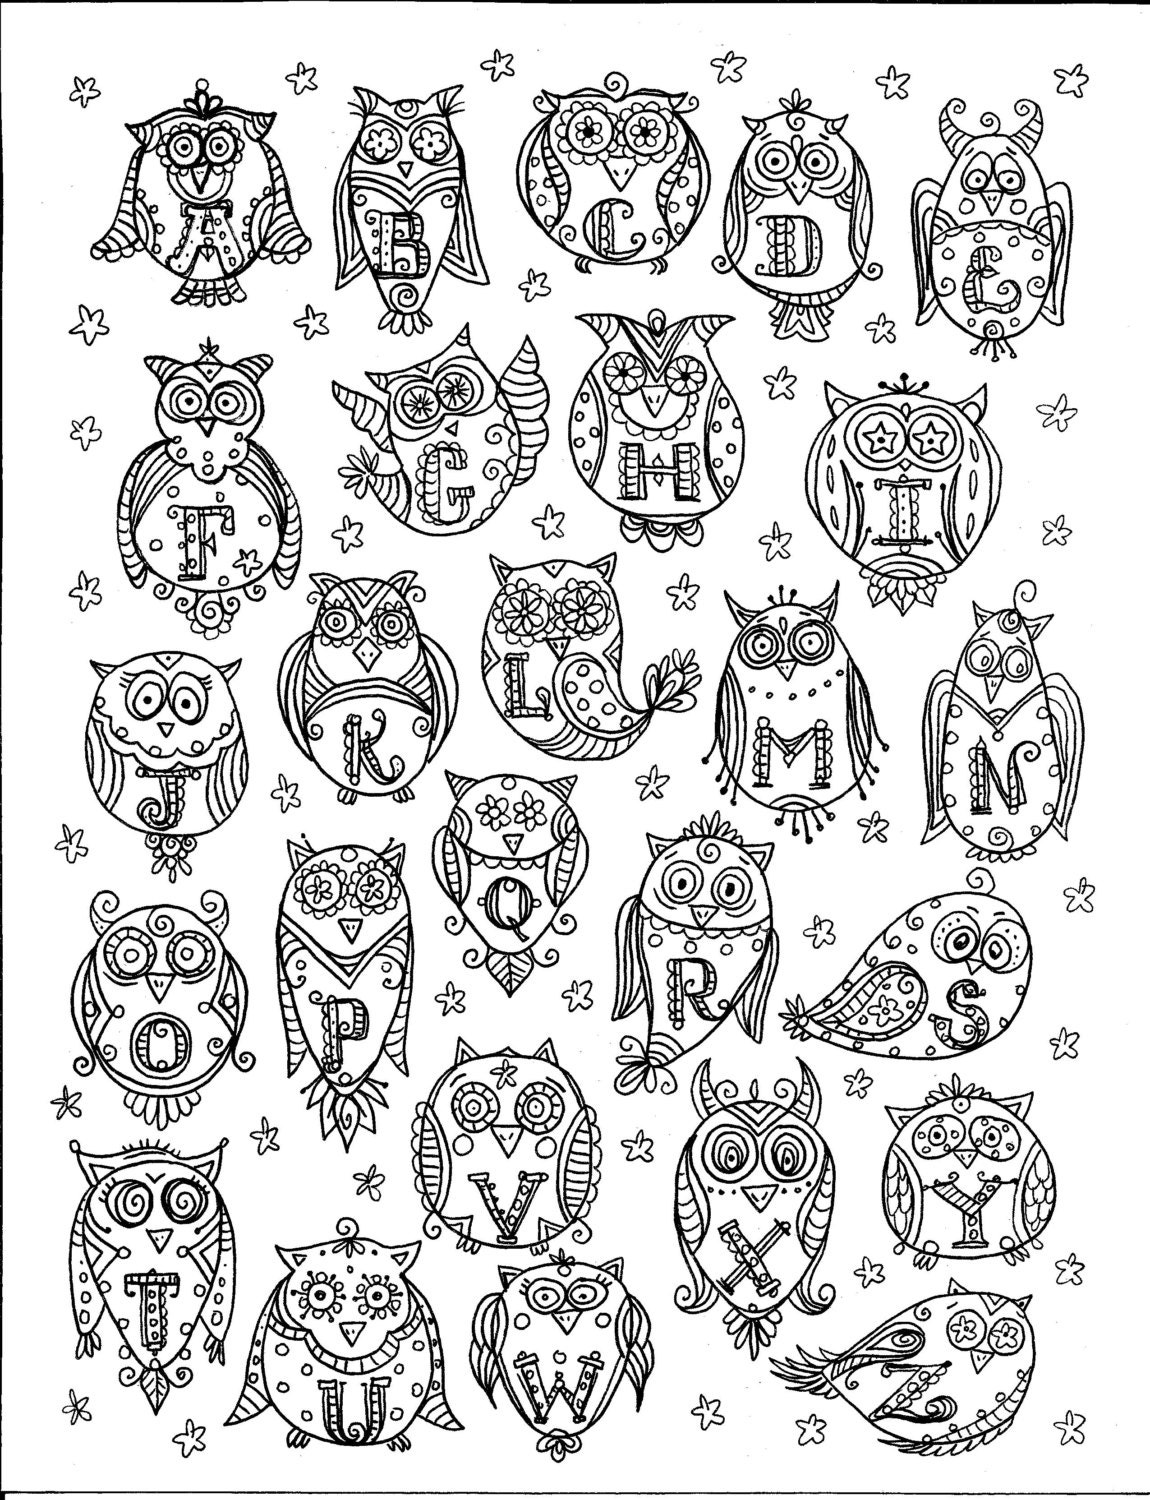 chouettes et hiboux on pinterest owl coloring pages owl on coloriage chouette id=65580